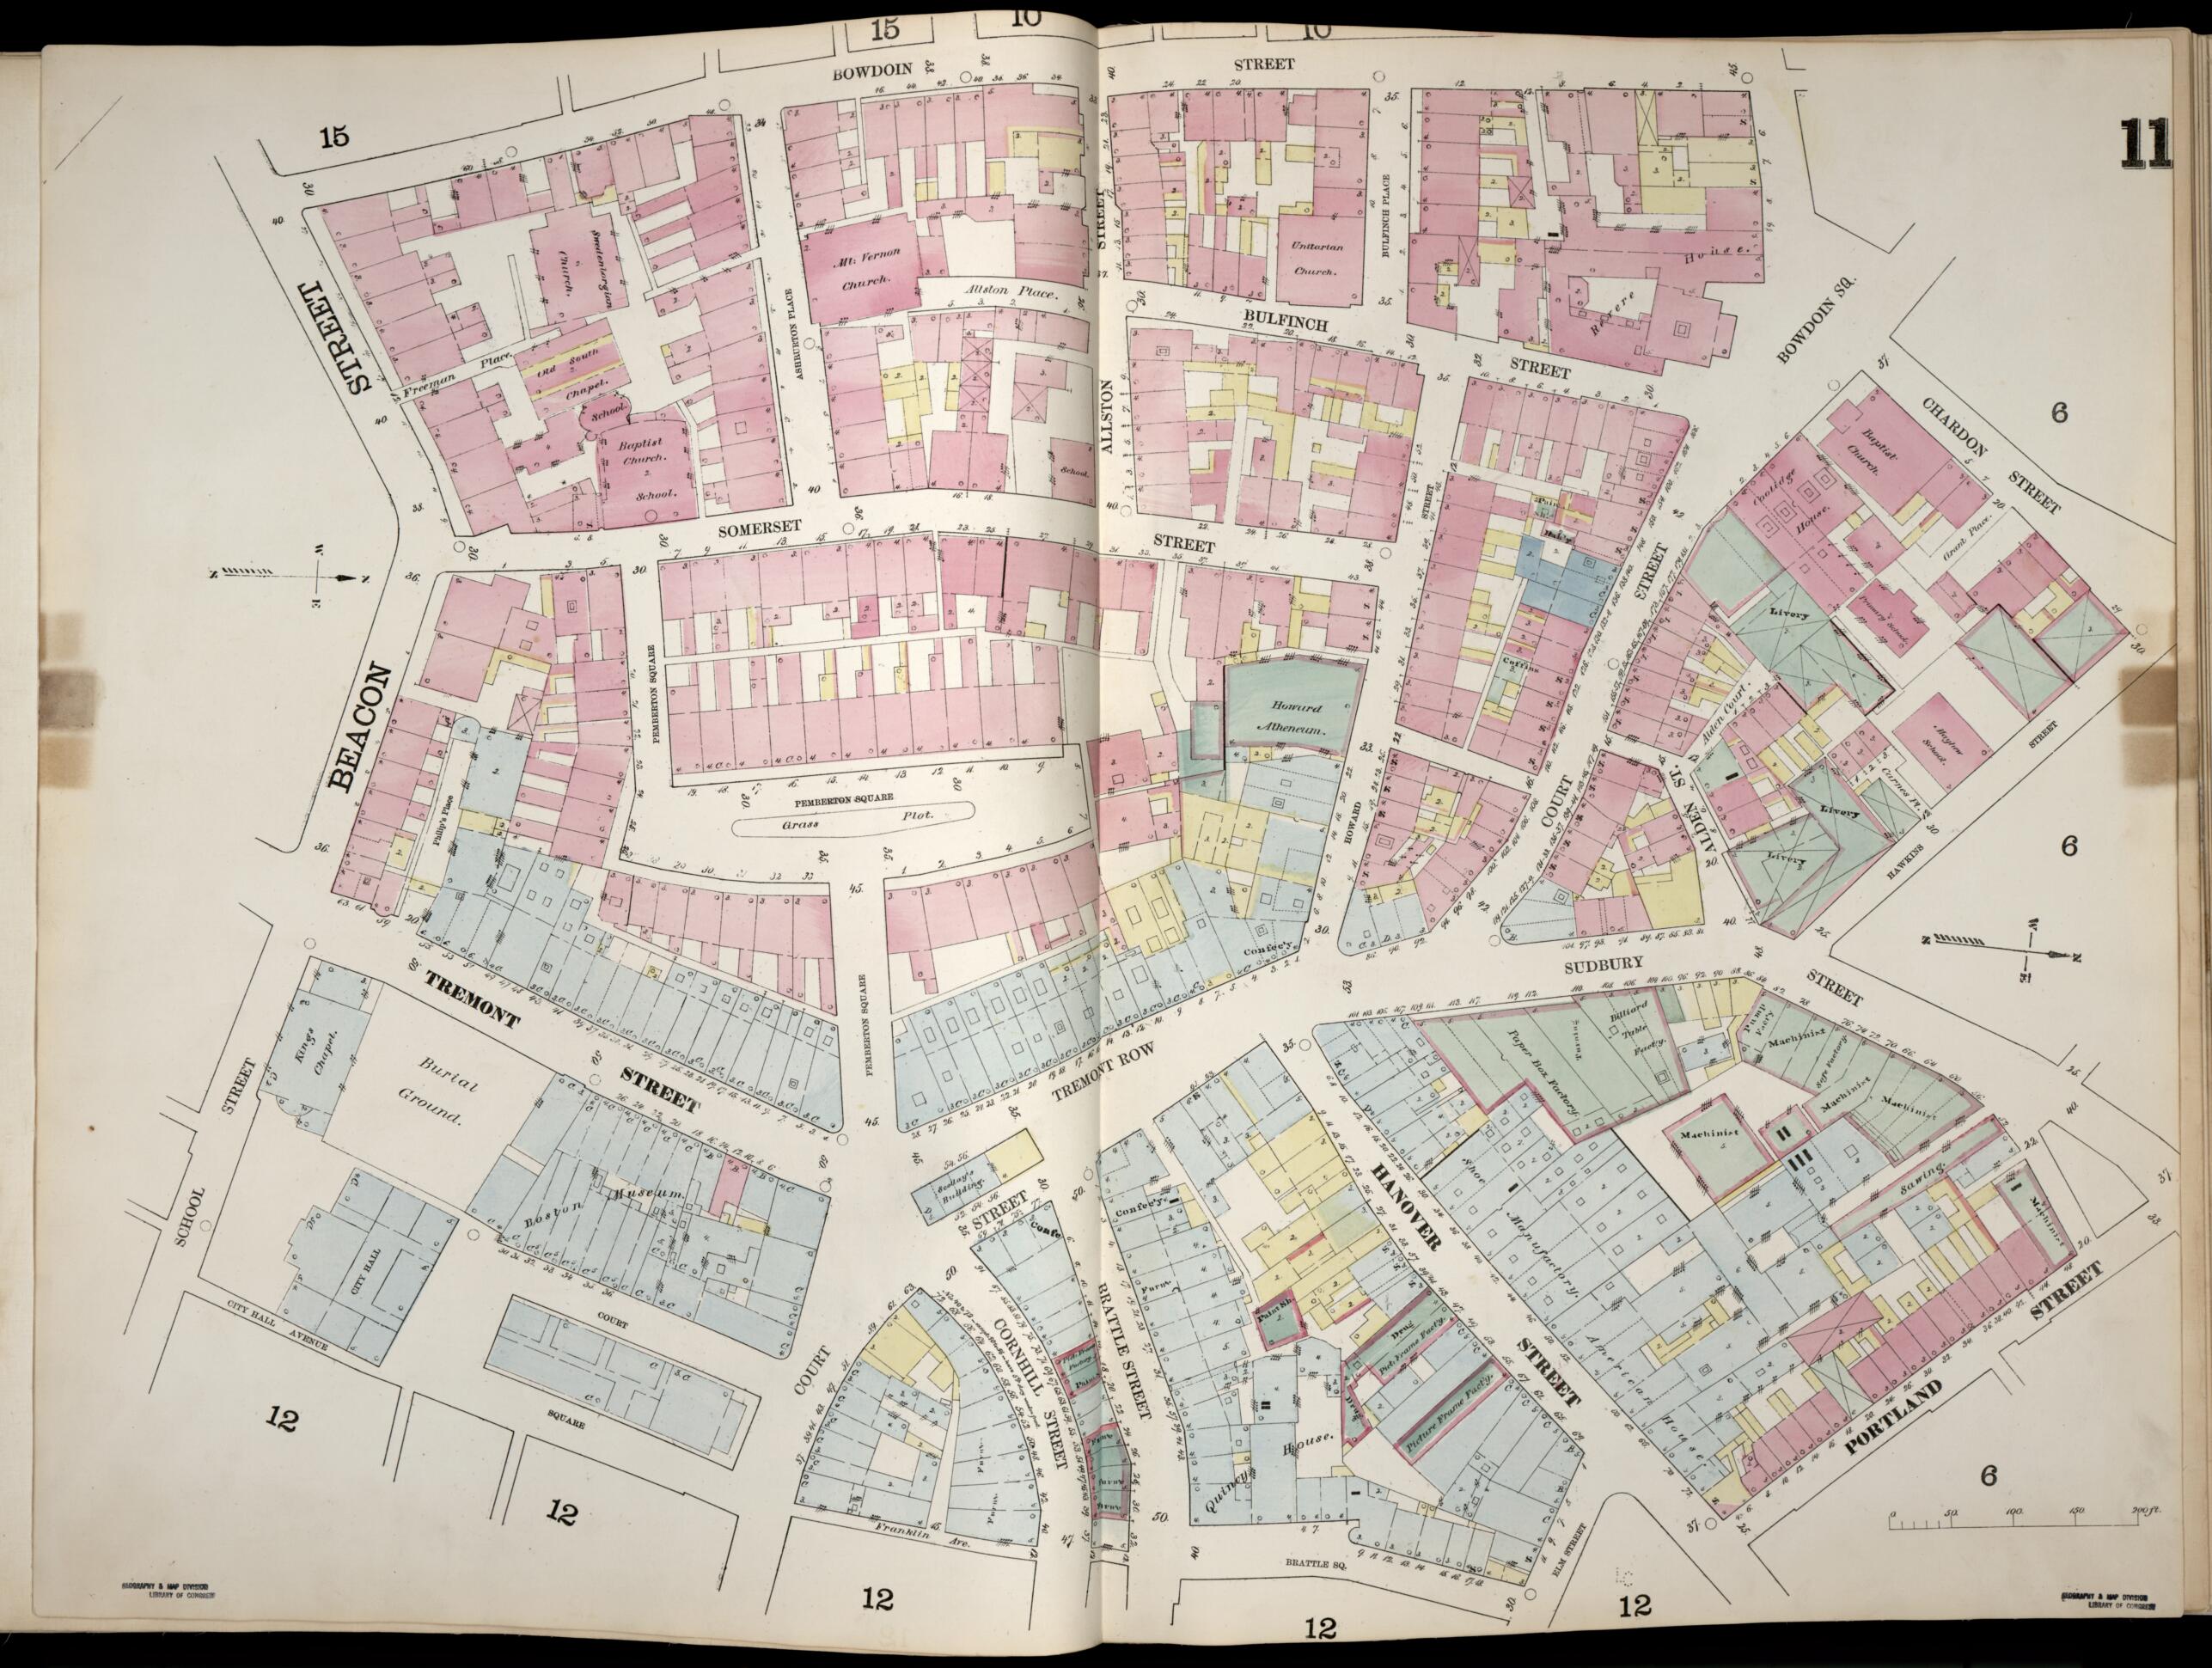 This old map of Image 12 of Boston from Insurance Map of Boston. Volume 1 from 1867 was created by D. A. (Daniel Alfred) Sanborn in 1867